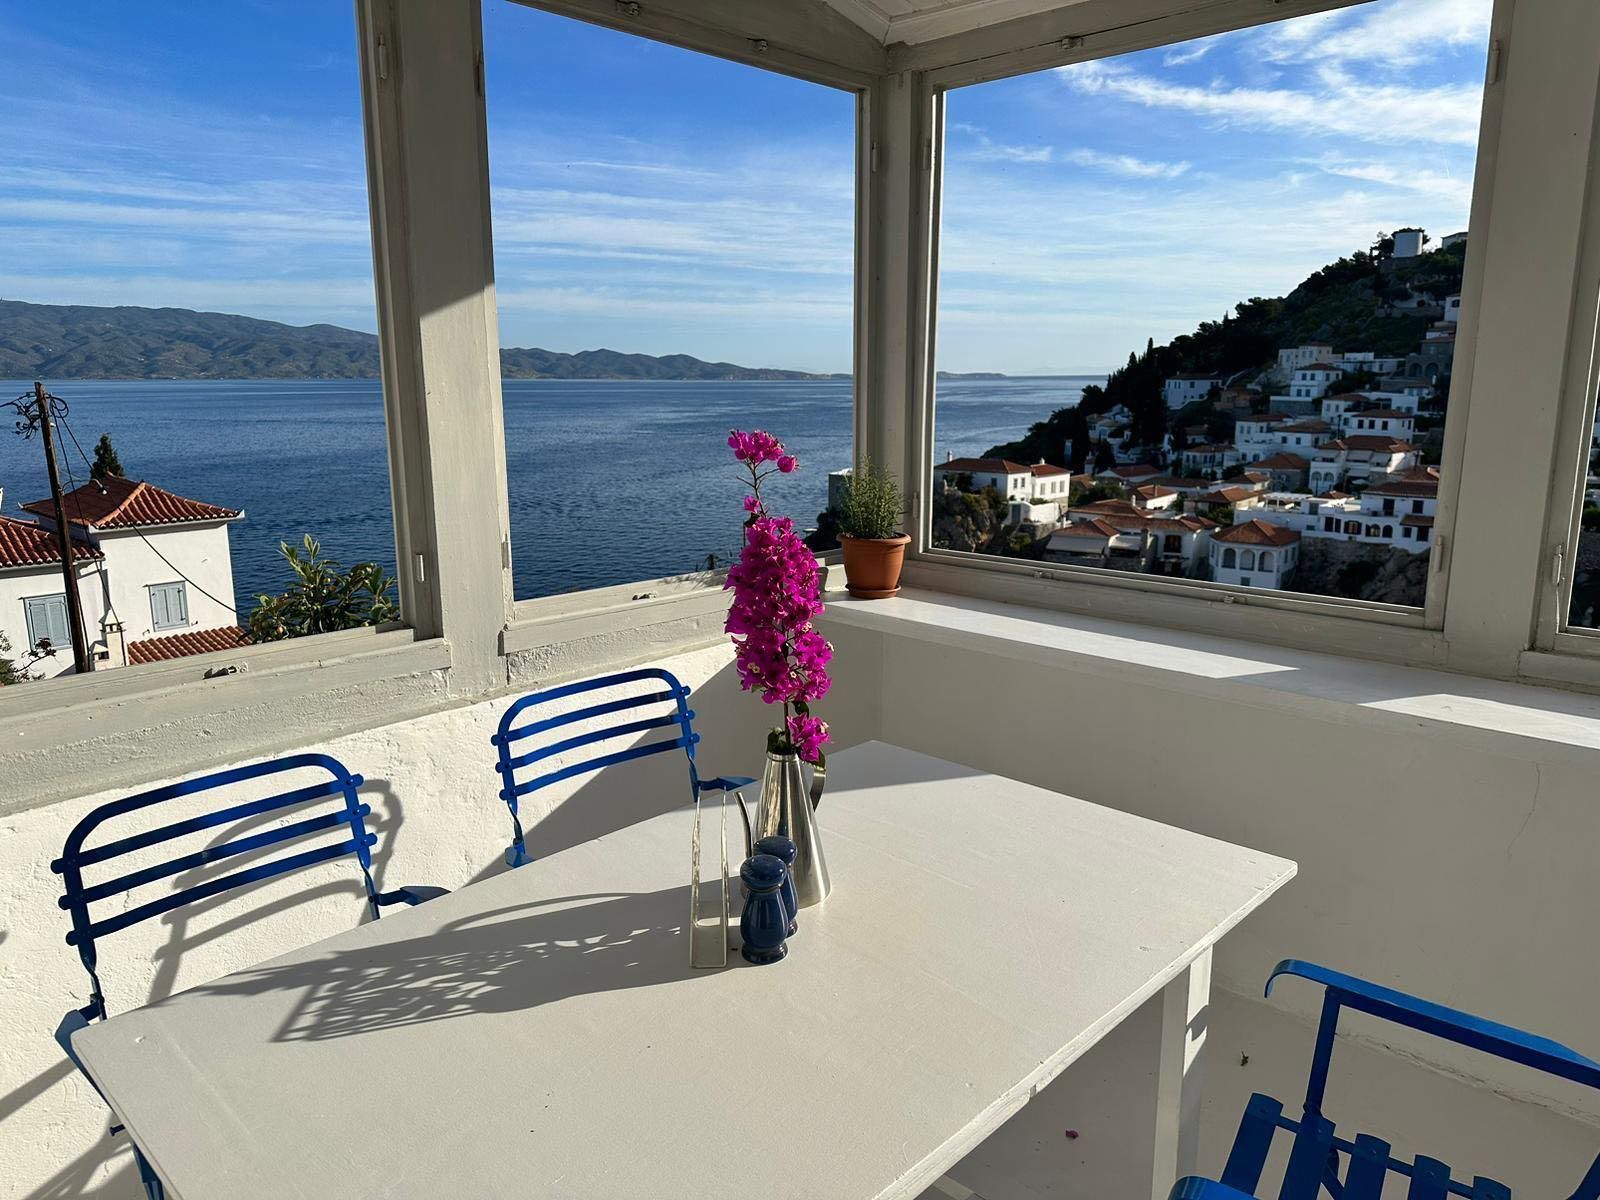 Louisa's View - Private Holiday Apartments on Hydra - Accommodation on Hydra Island Greece.